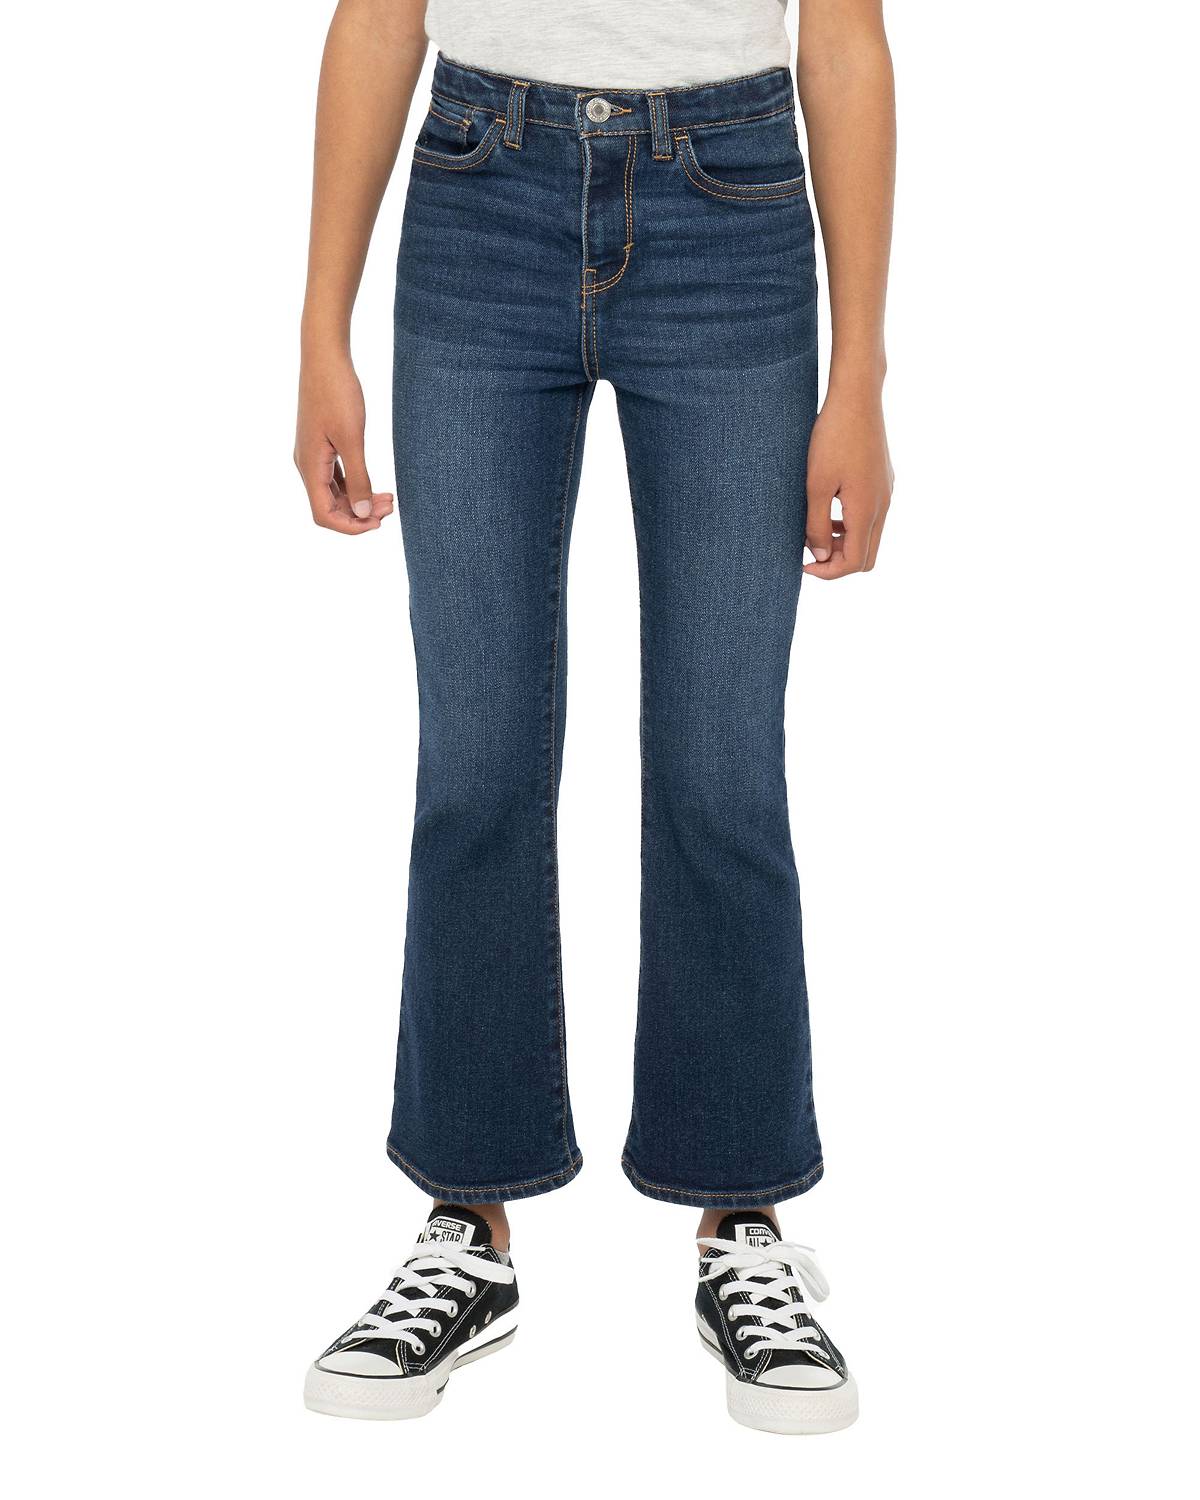 Girl wearing High Rise Flare jeans